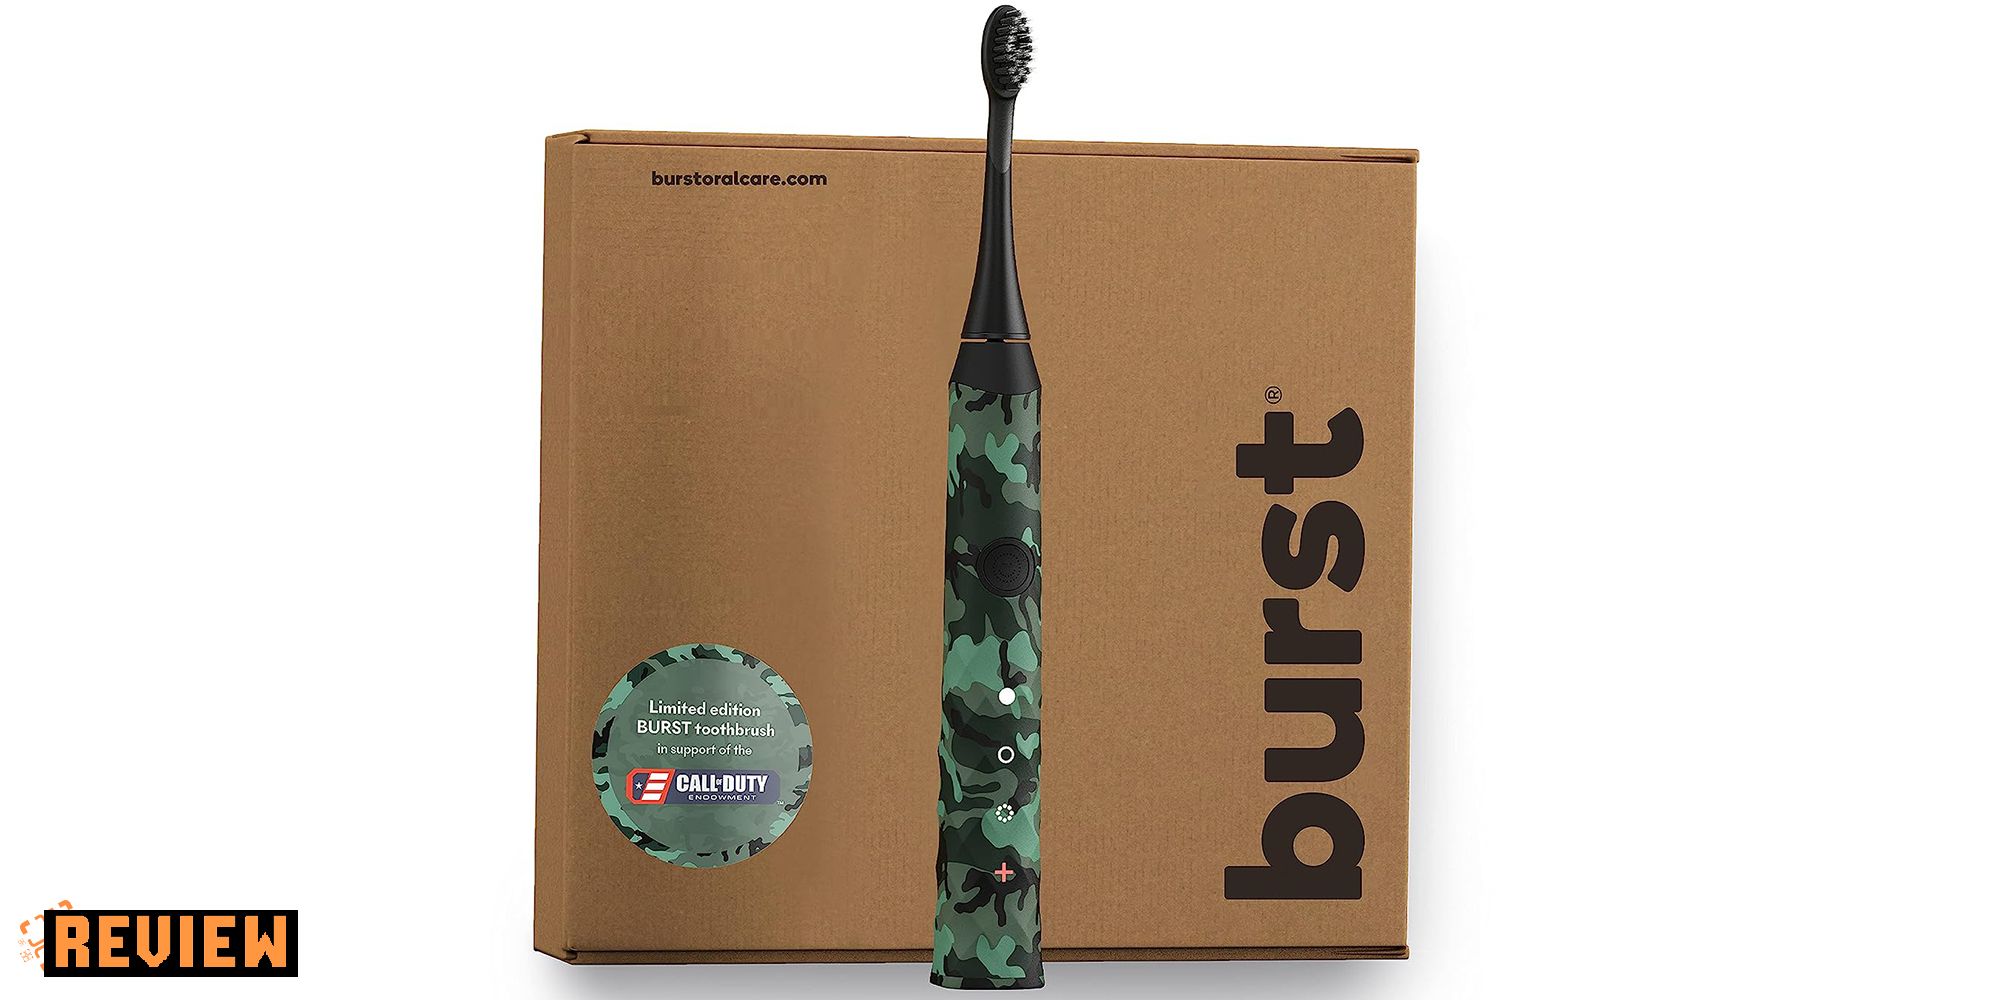 Product image for Call Of Duty BURST Sonic Toothbrush.